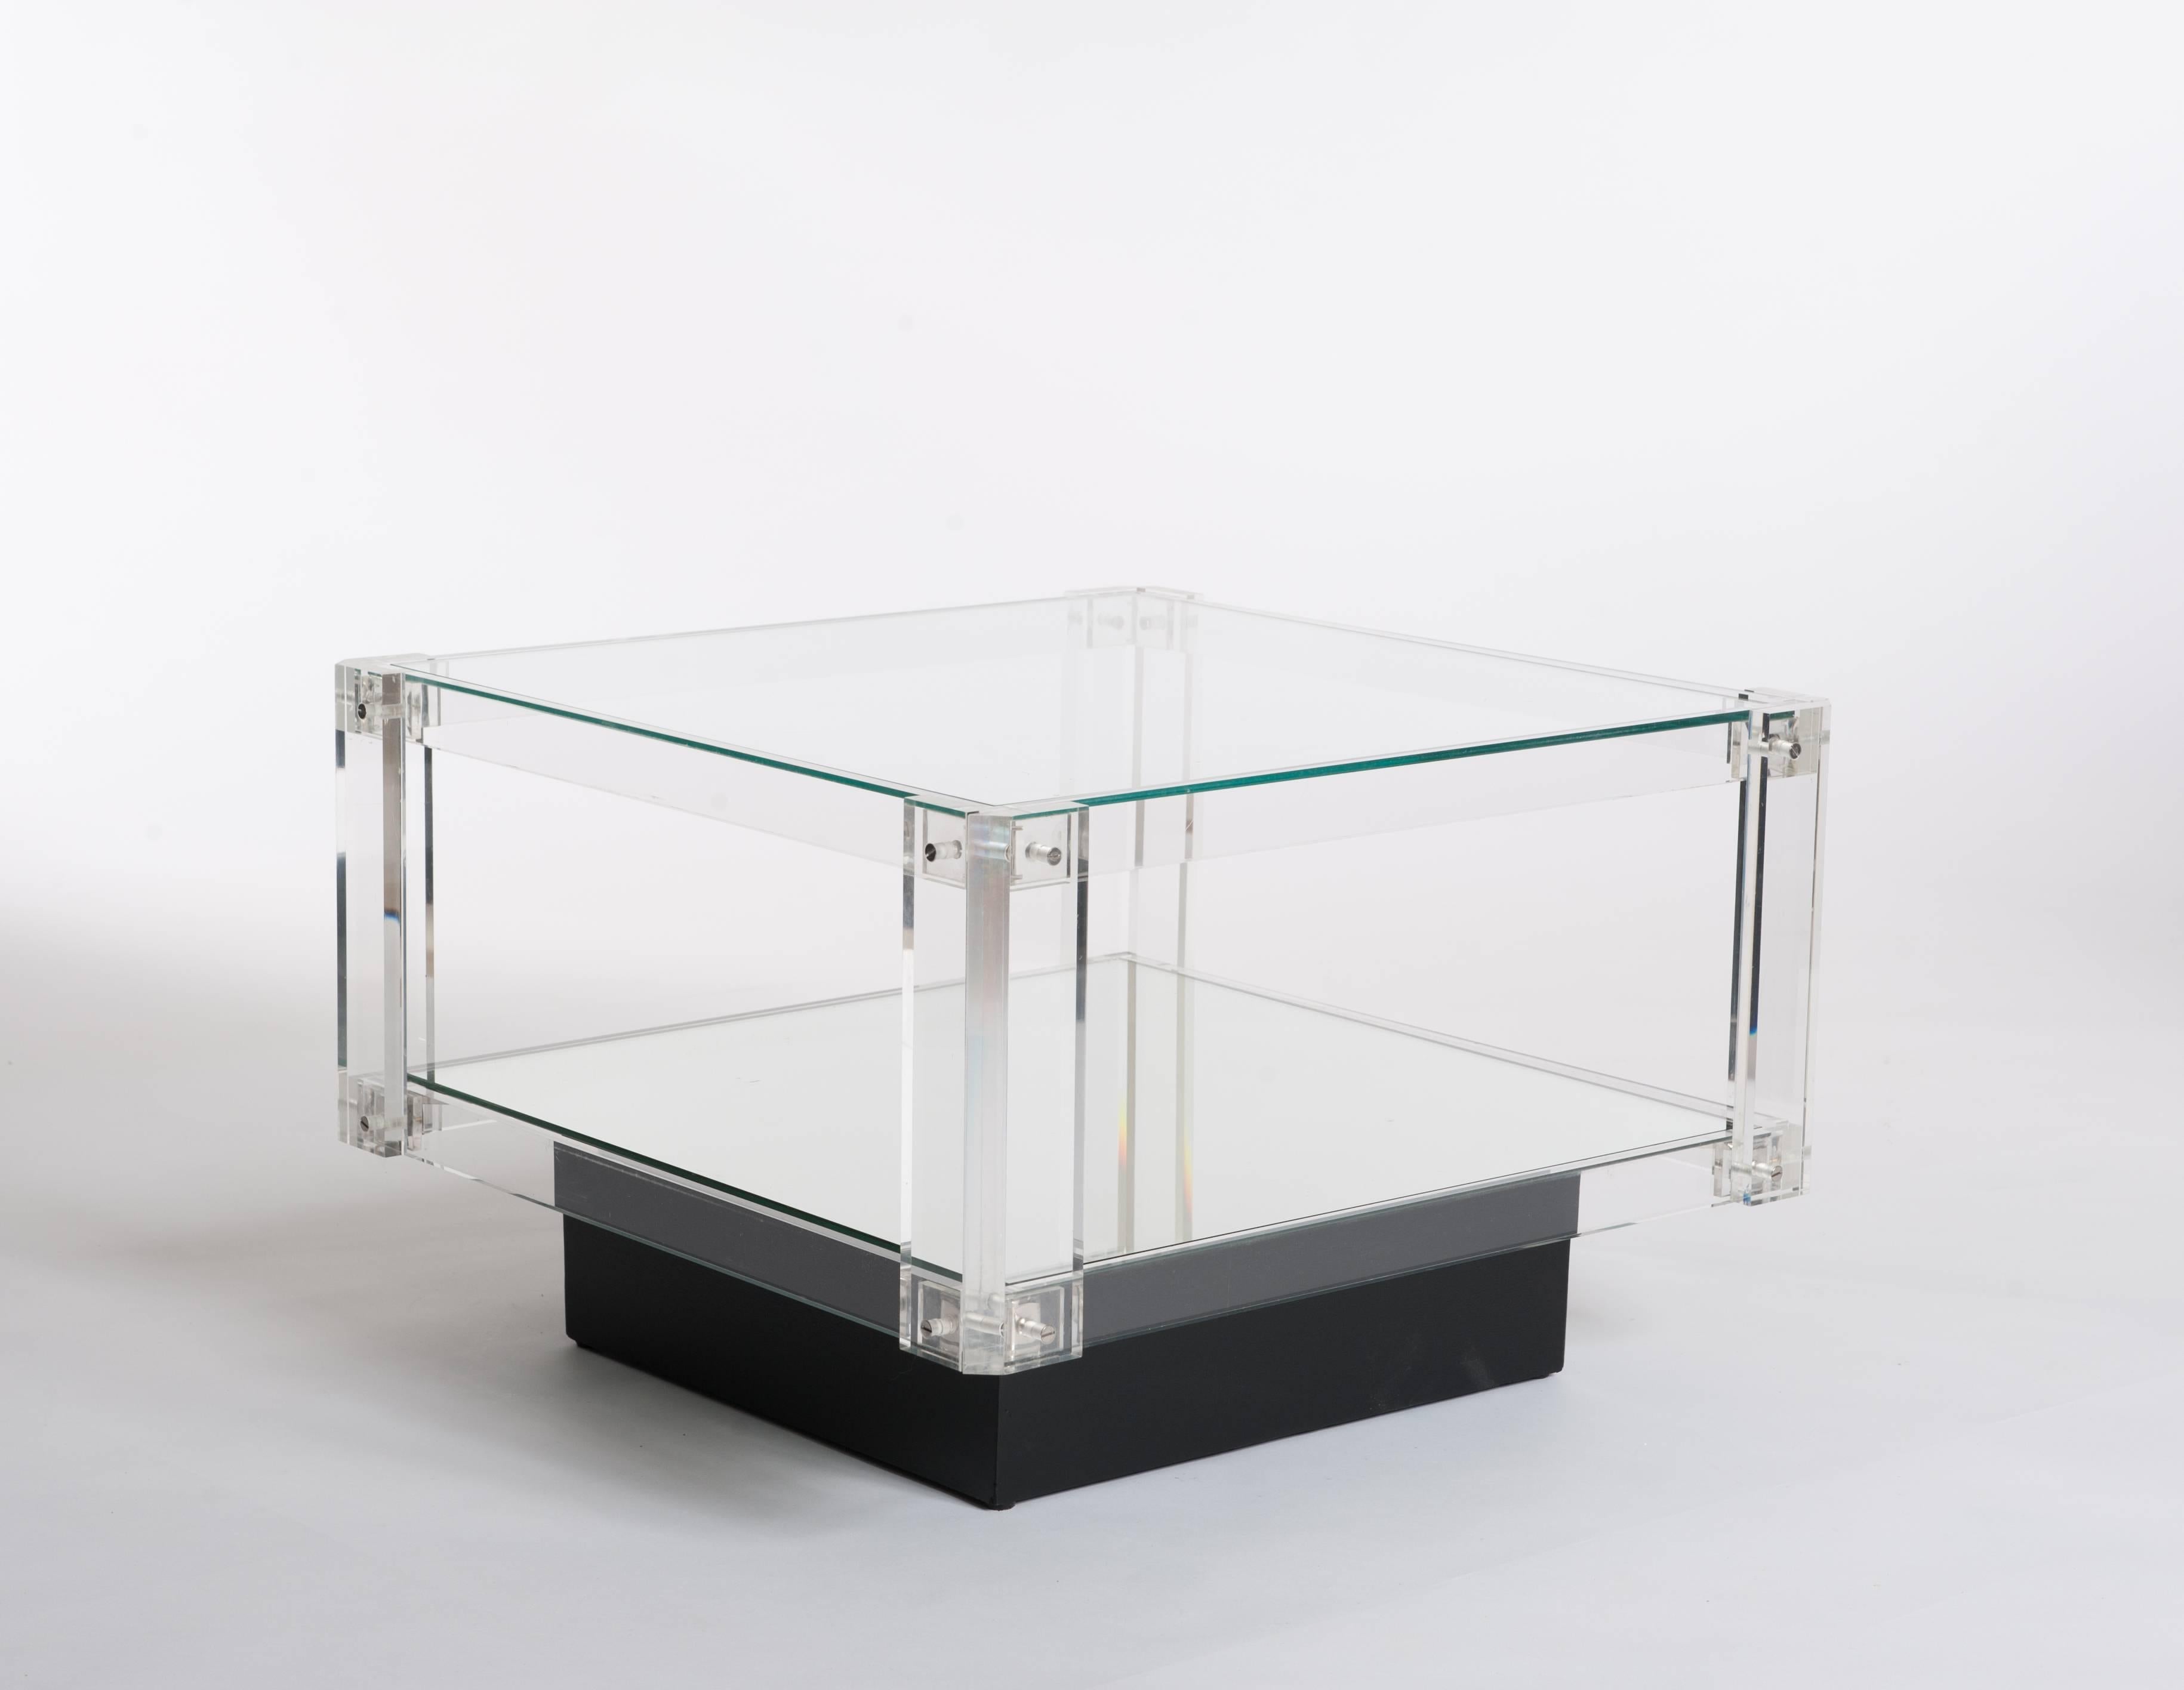 Cubistic shaped pair of side tables made out of different materials.
The frame is made out of acrylic glass combined with glass top, mirrored base
on wooden black socle.
Typical pure Scandinavian design.
Size of socle: 41cm x 41cm x 12cm.